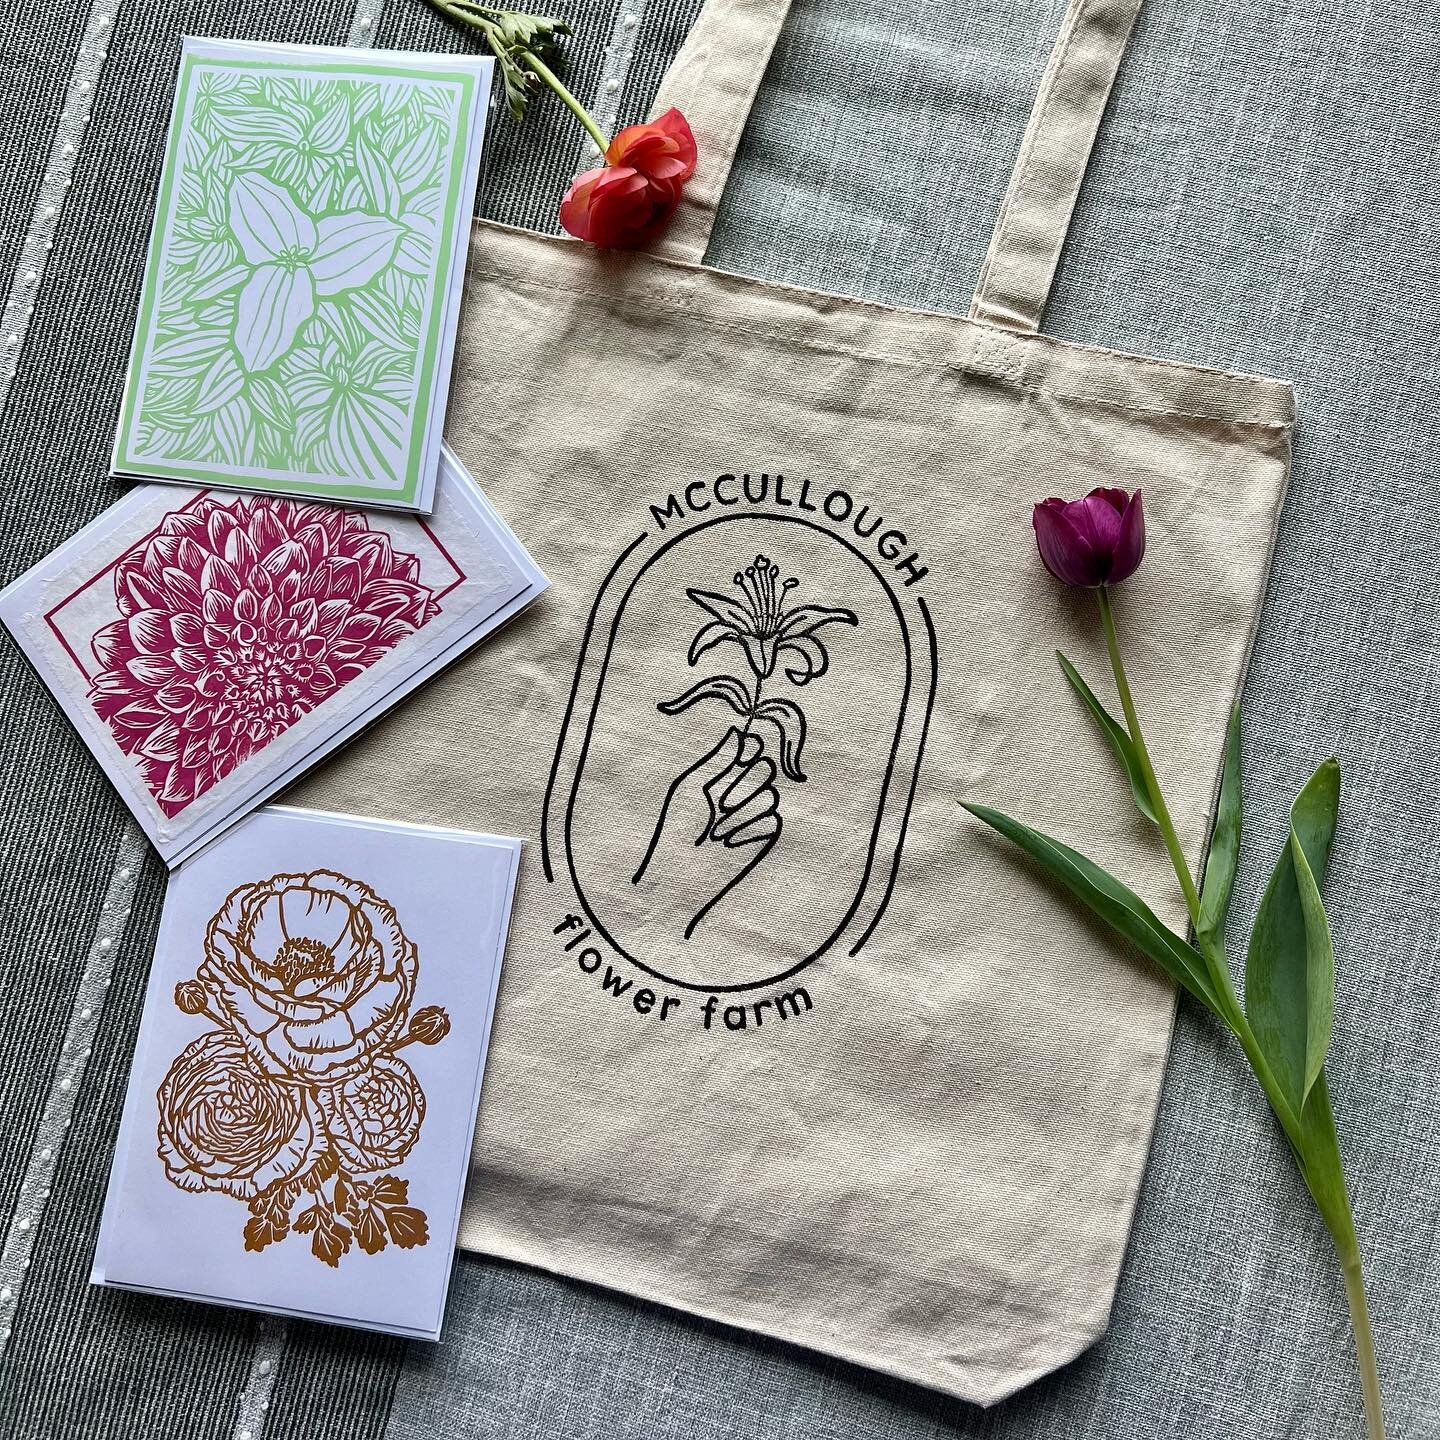 Very excited to introduce McCullough Flower Farm logo tote bags! The totes are hand printed by @stardogcreations  using the linocut printing technique (check out her page for all her magical creations and glimpses into her process). 

A limited numbe